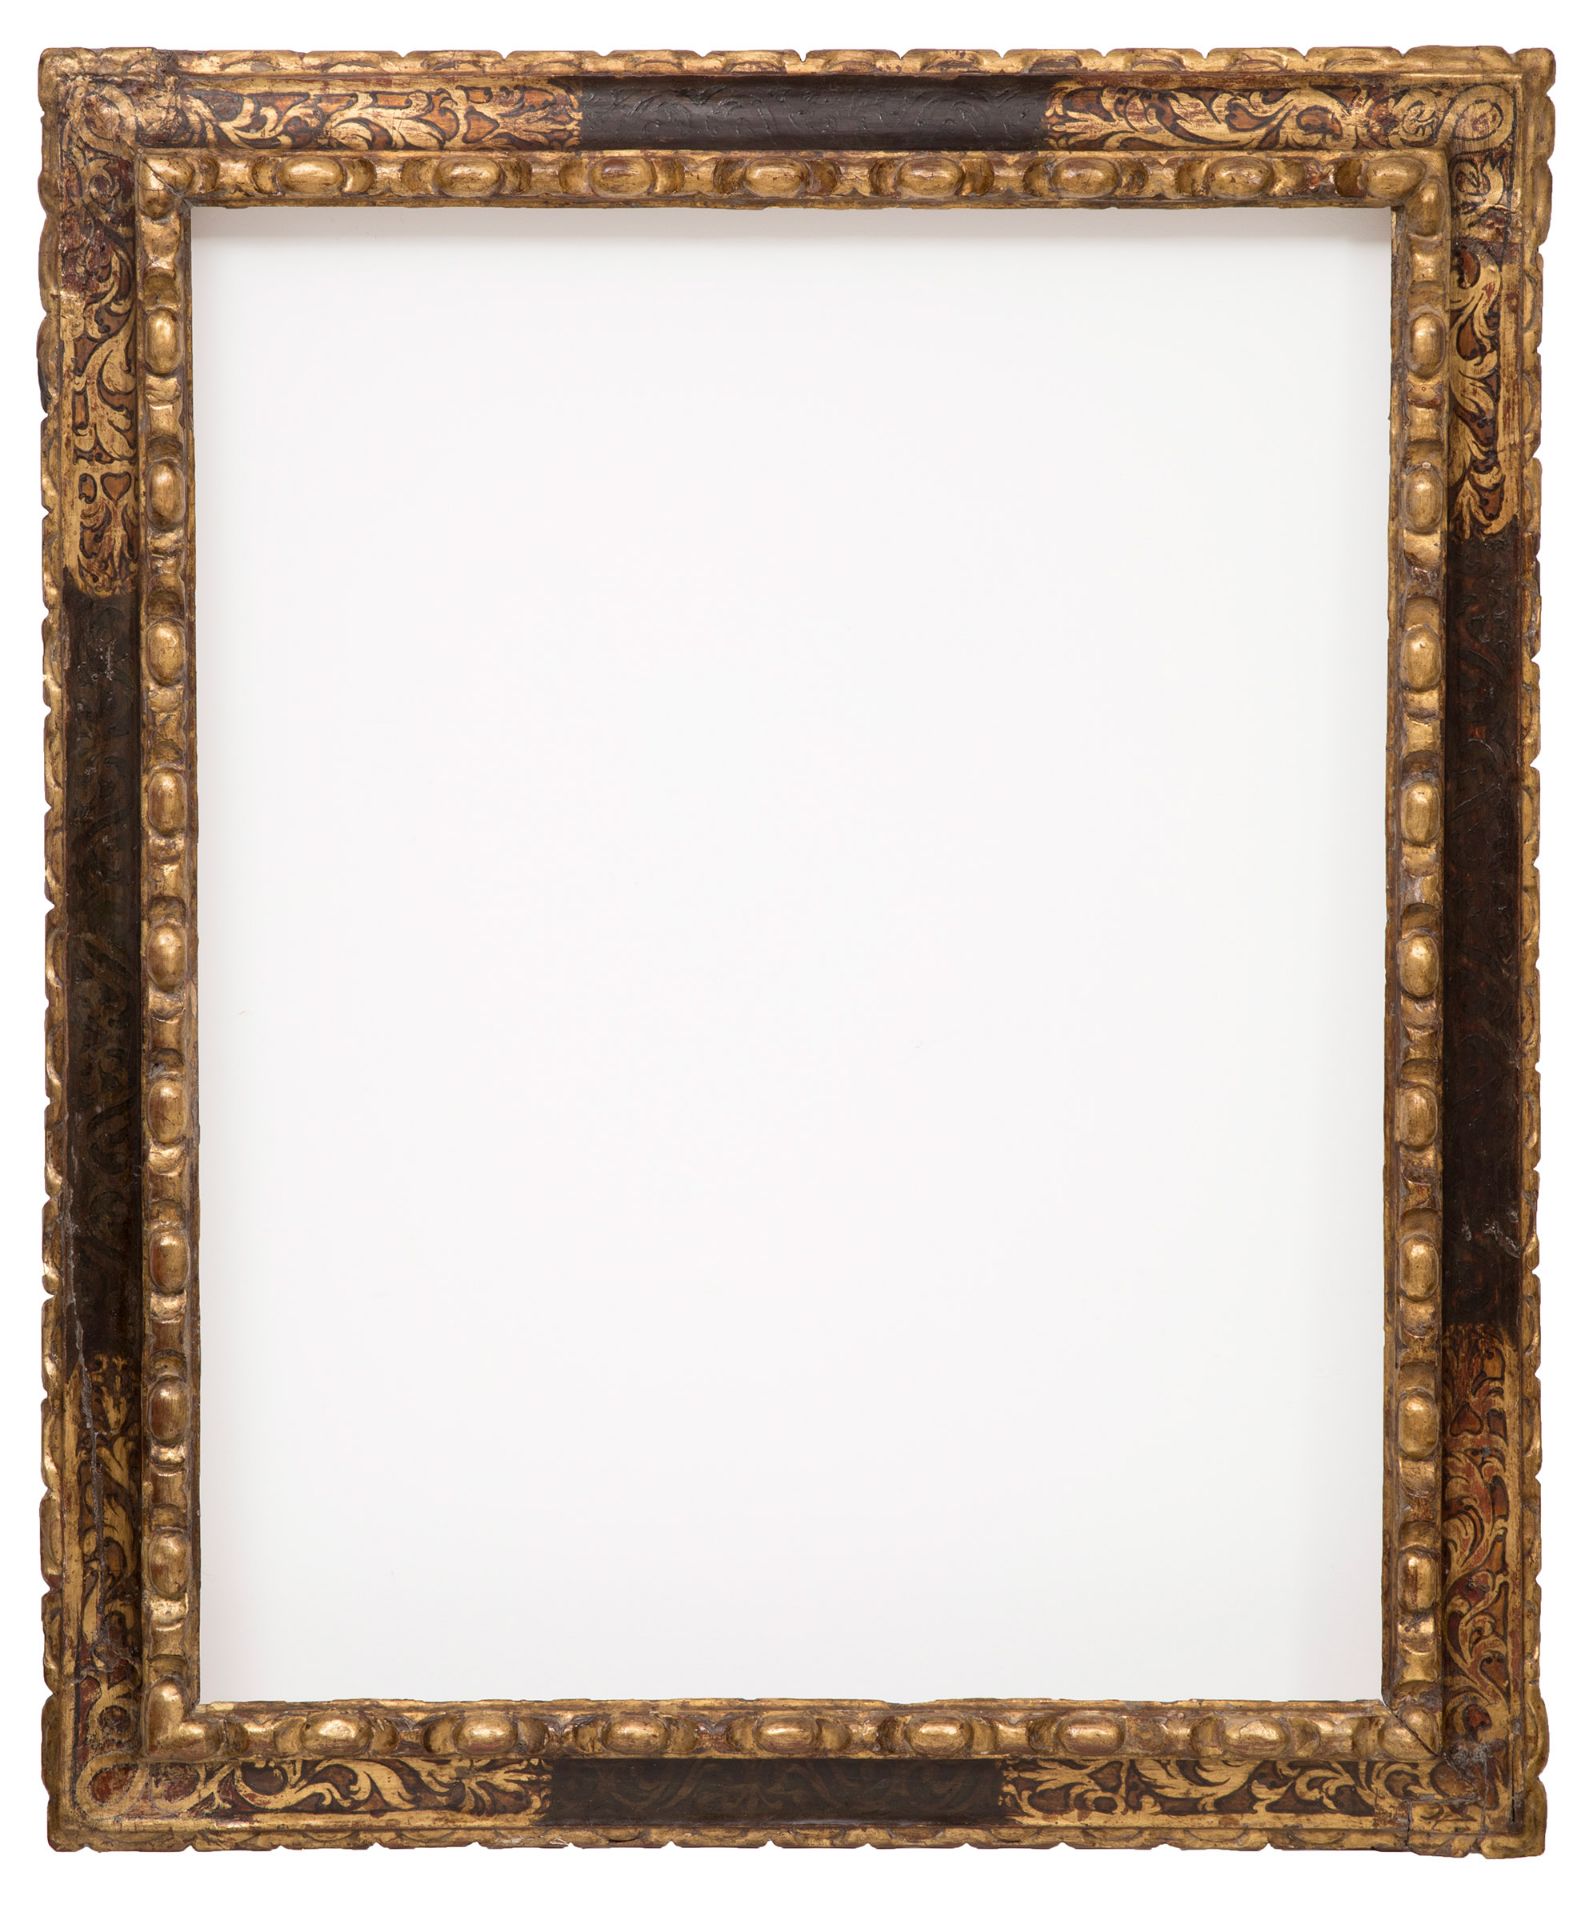 Spanish frame; 18th century.Carved and polychromed wood.It presents faults in the carving and in the